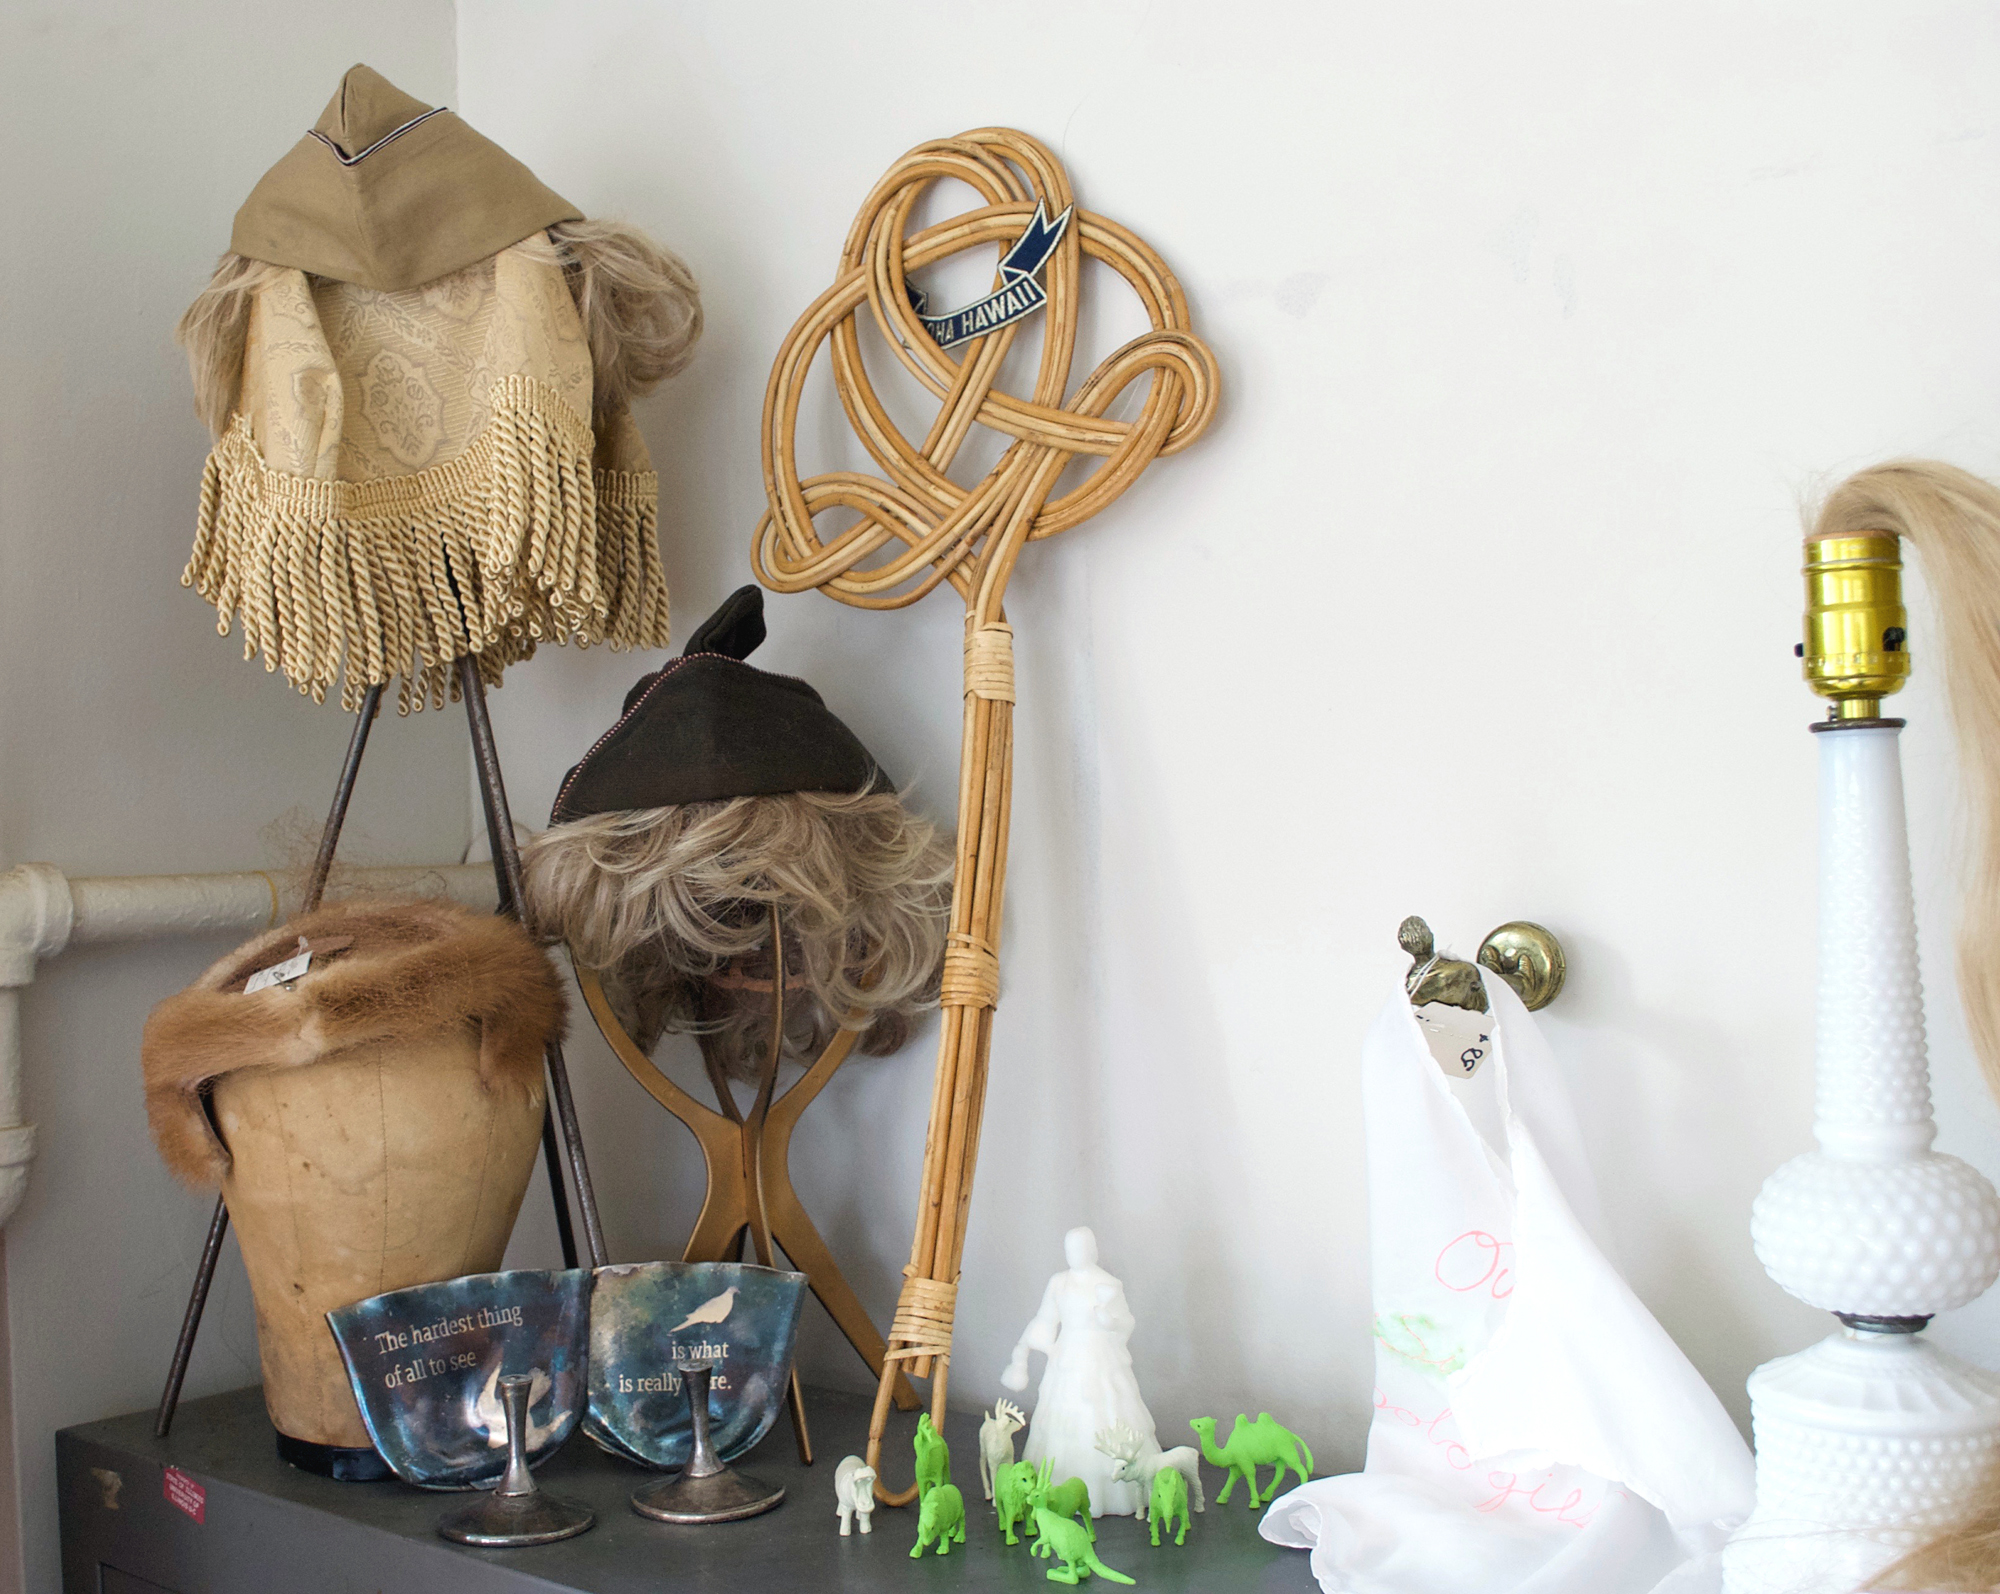 Image: A collection of objects sit on a shelf in Montgomery’s studio. From left to right: a wooden wig head holds a brown fur cap; a metal stand holds a piece of fringed, beige fabric atop which sits a wedged cap with blonde hair; another metal stand holds a wedged cap with blonde hair; a wooden rug beater; small human and animal figurines; a lamp with blonde hair in the place of a lightbulb. Photo by Jessica Hammie.